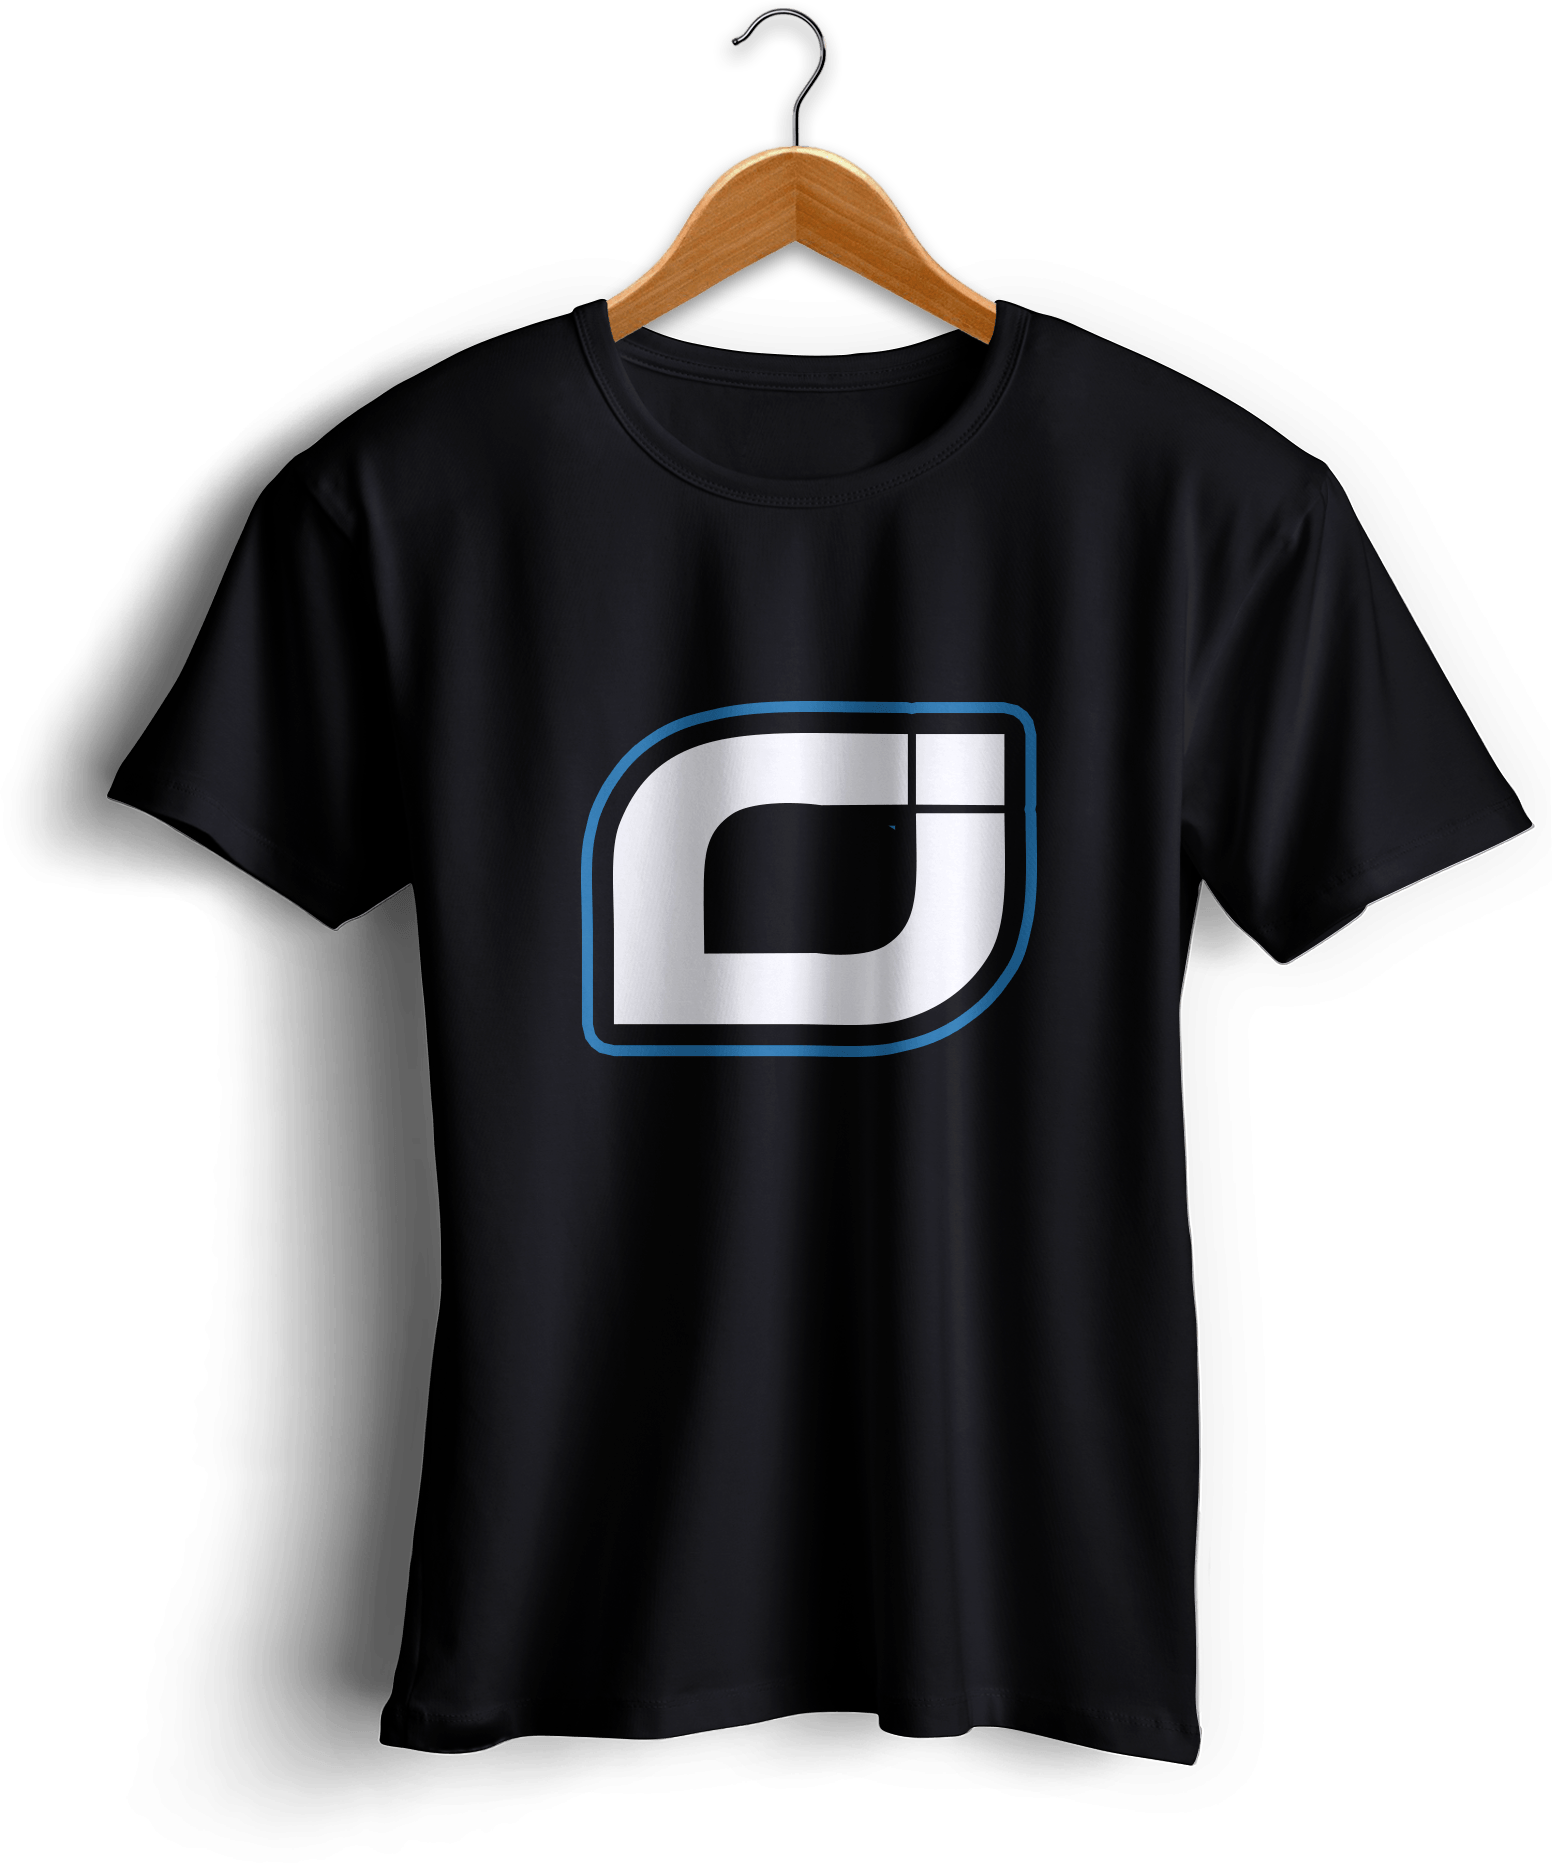 Obey Supremacy Logo - Obey Supremacy T Shirt